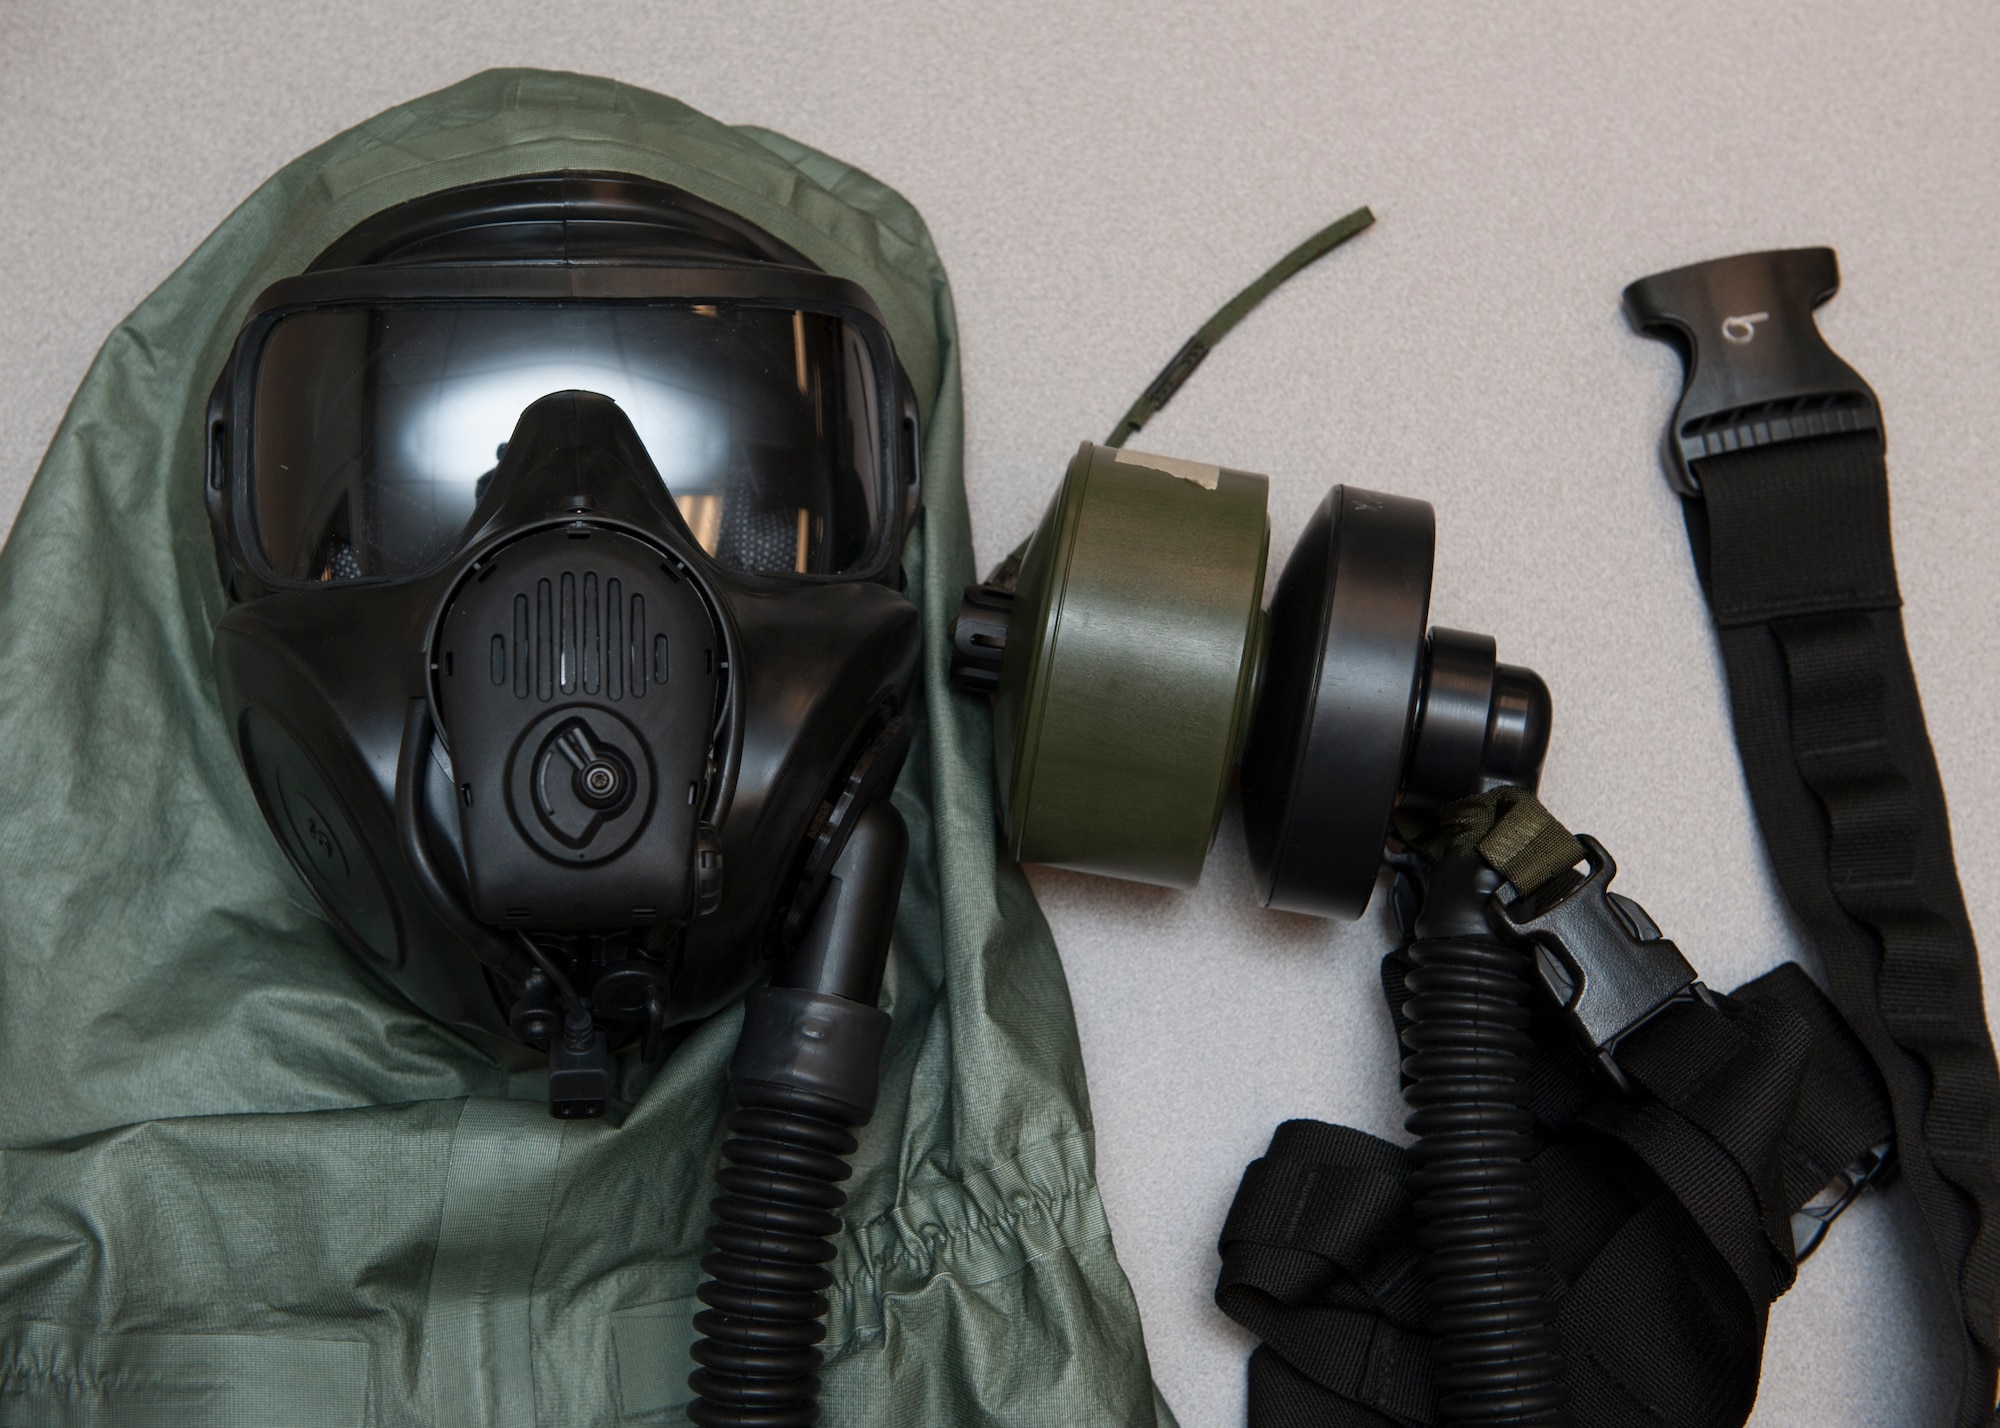 The XM69 Aircrew Chemical, Biological, Radiological and Nuclear Defense (CBRN) system sits on display March 2, 2016, inside the Aircrew Flight Equipment facility on Dover Air Force Base, Del. The XM69 is expected to replace the legacy U.S. Air Force Aircrew Eye Respiratory Protection (AERP) system. (U.S. Air Force photo/Senior Airman Zachary Cacicia)